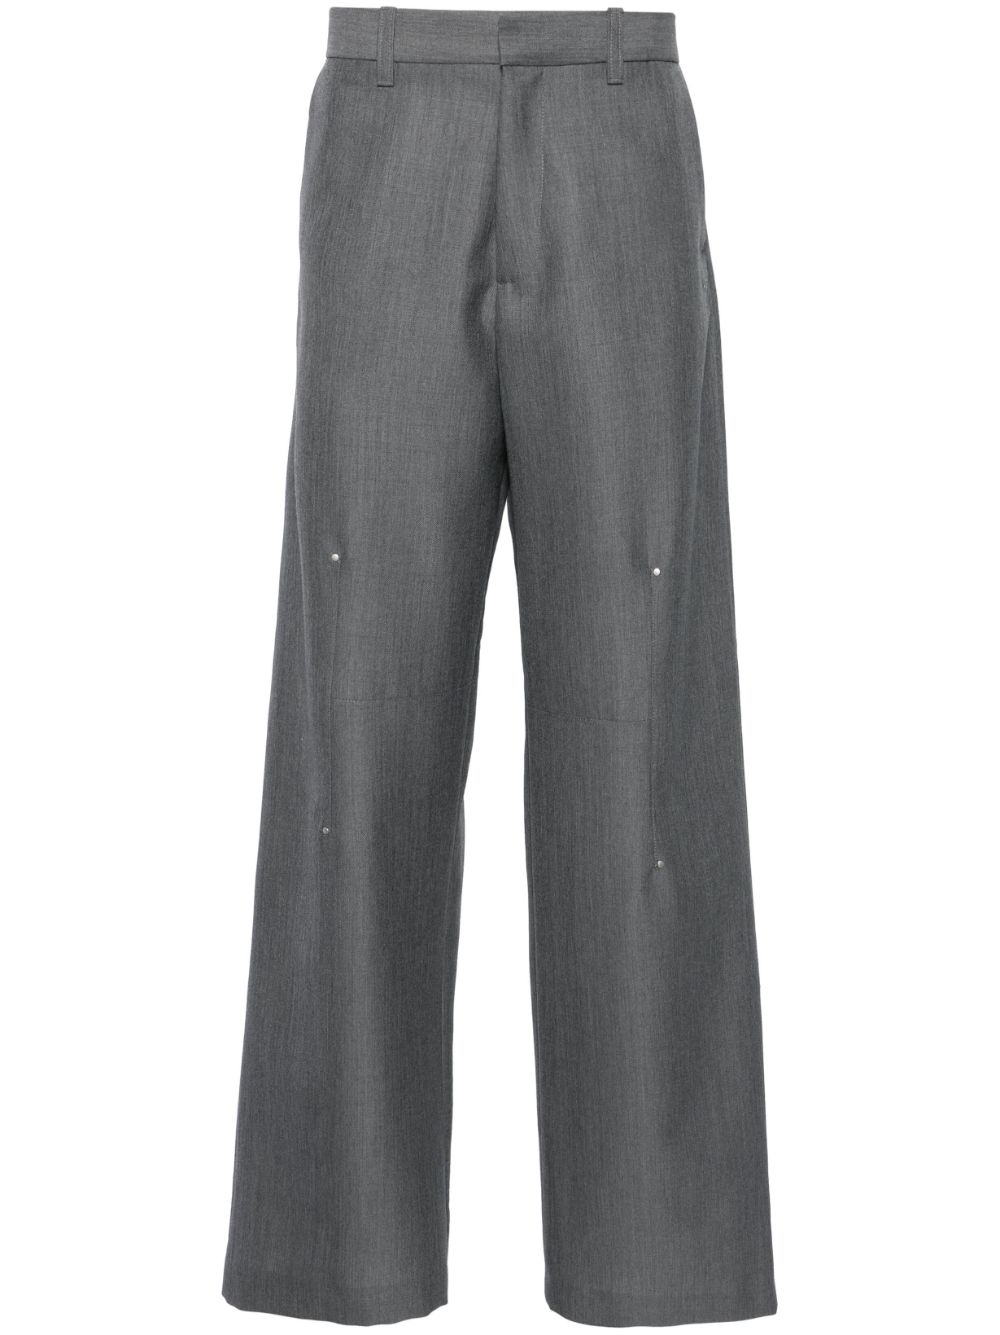 HELIOT EMIL Radial tailored trousers - Grey von HELIOT EMIL